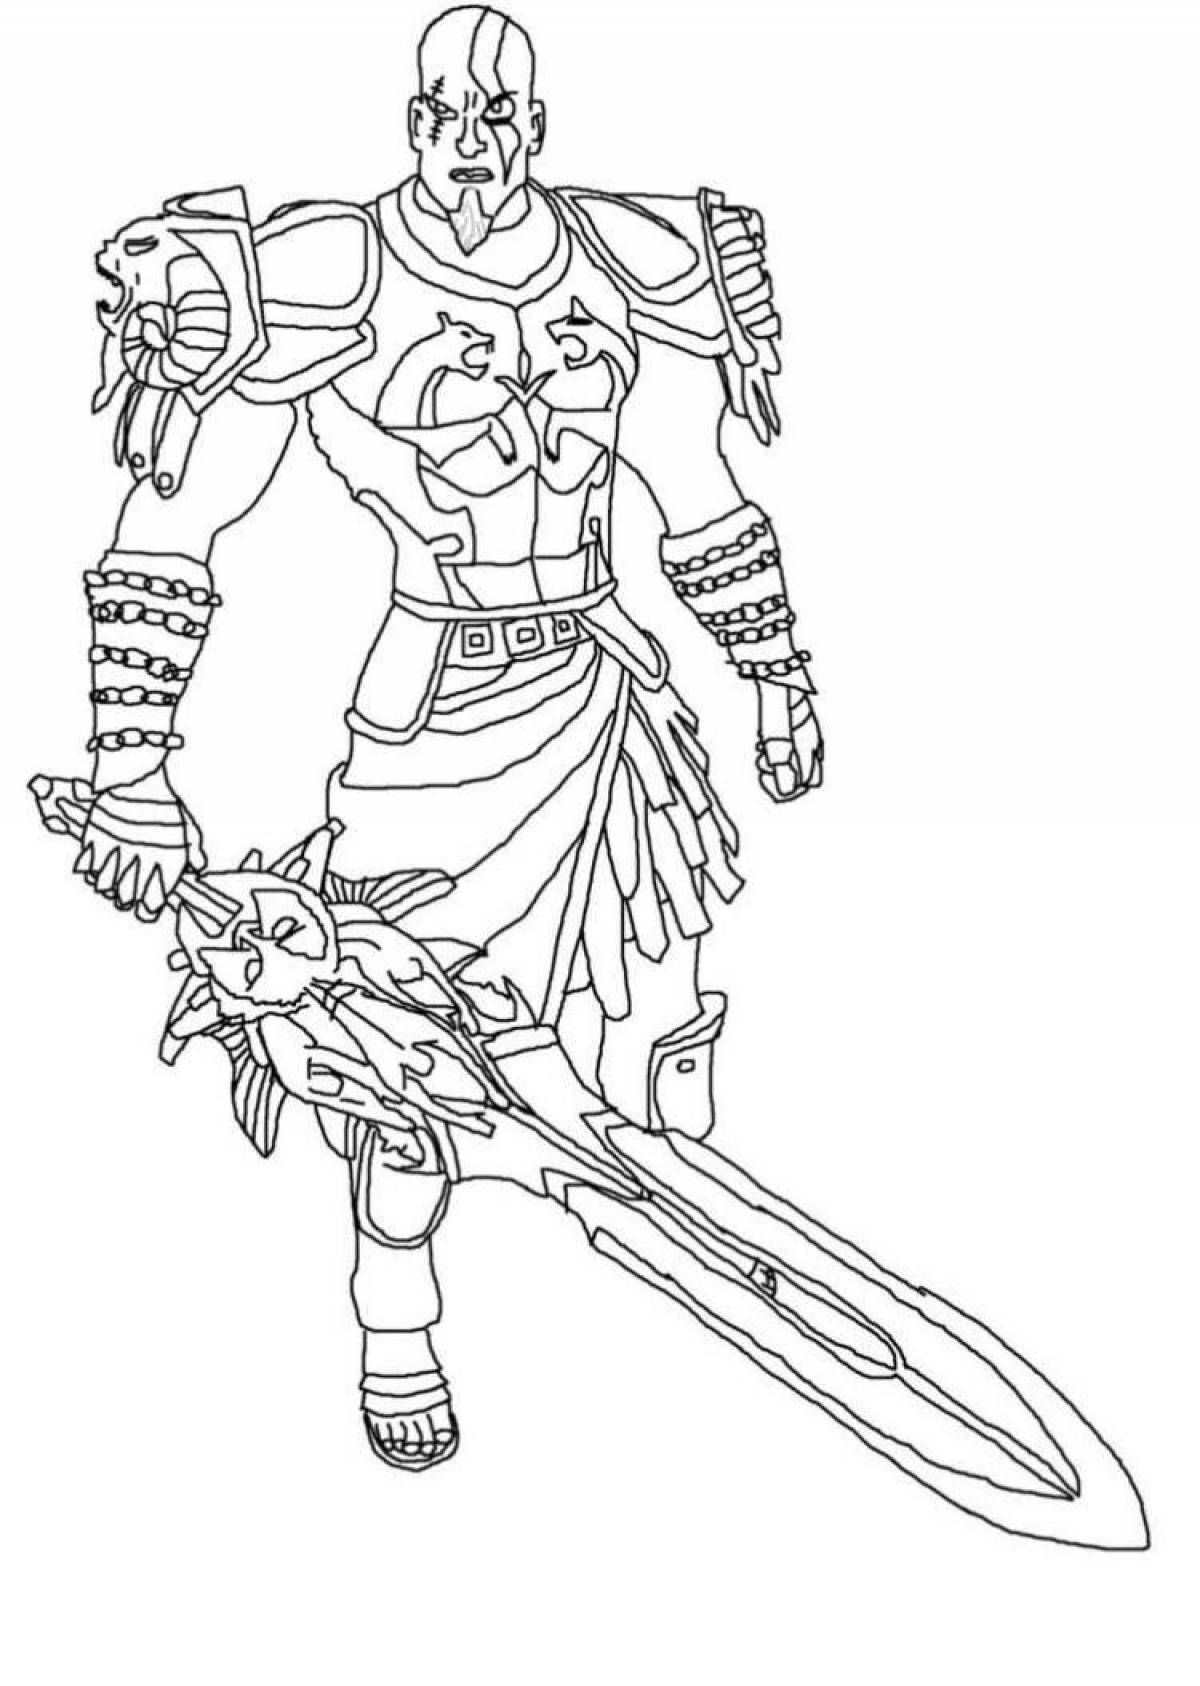 Bright god of war coloring page